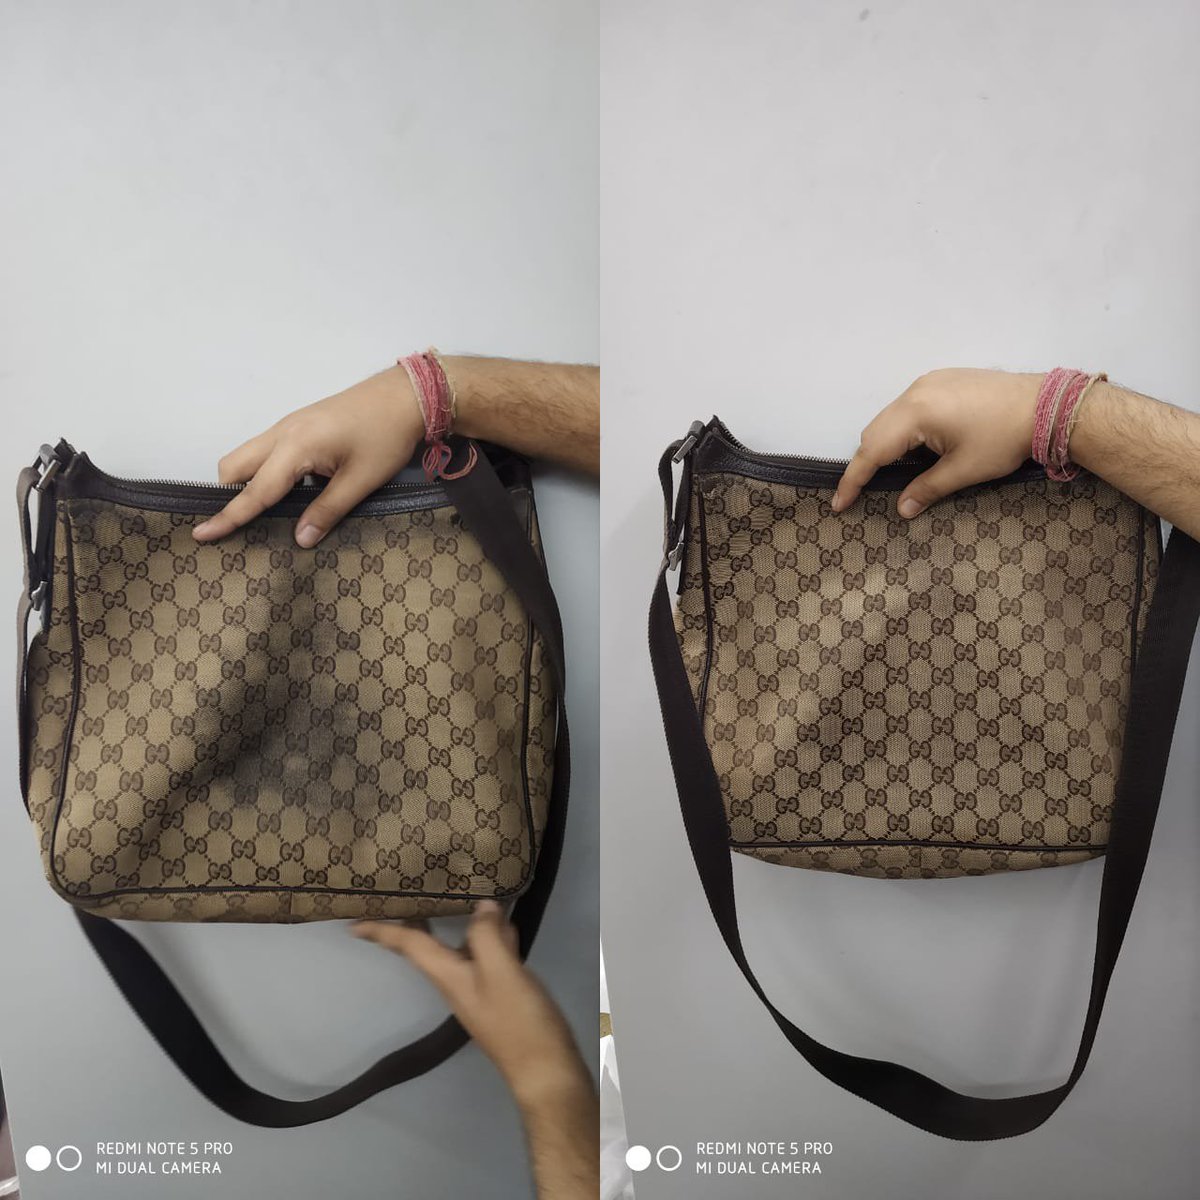 how to clean a gucci canvas bag